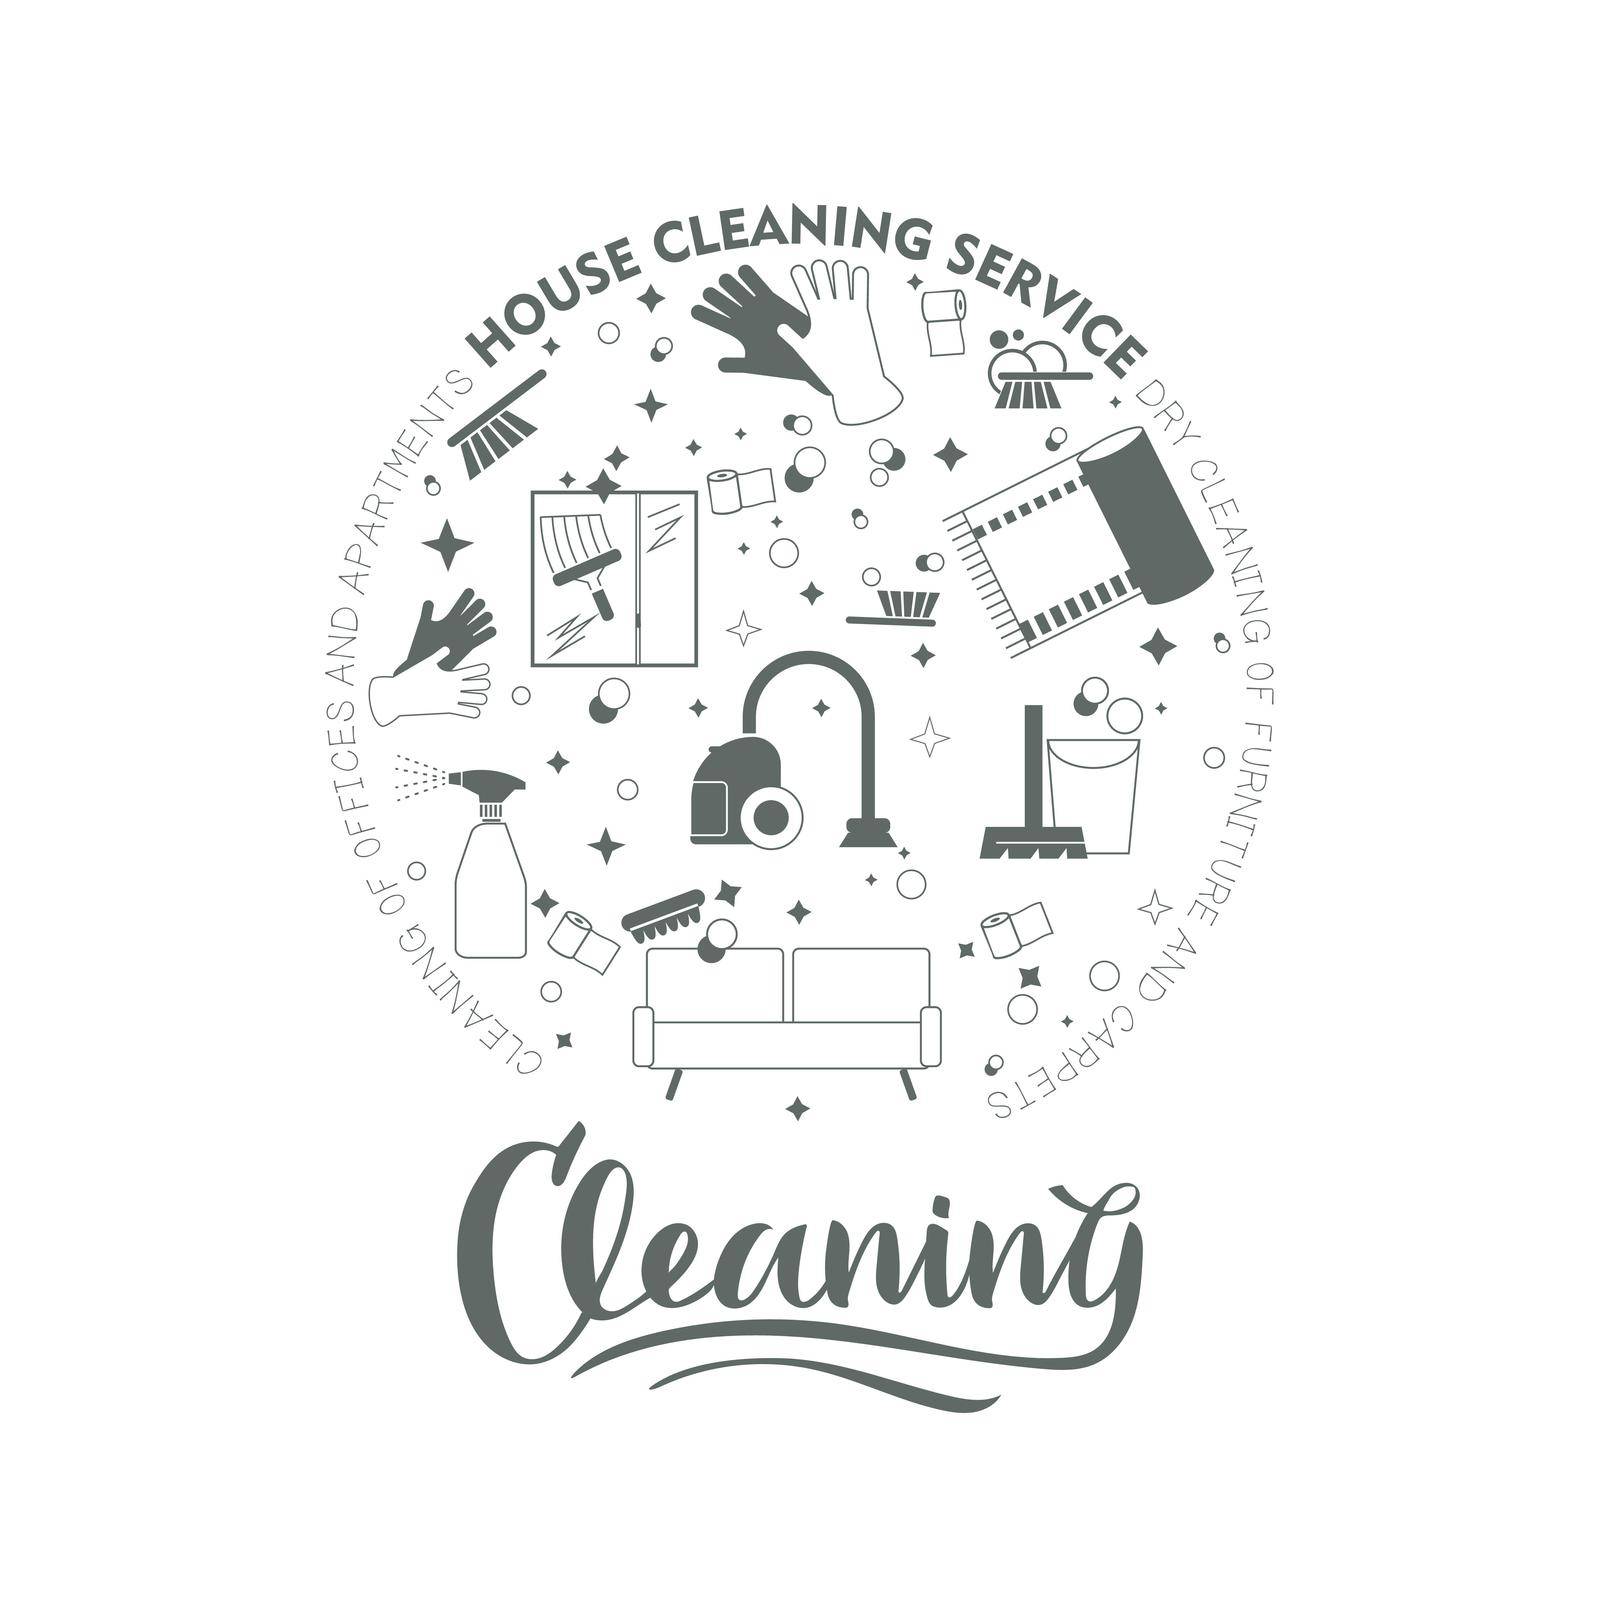 Cleaning company concept. by GALA_art